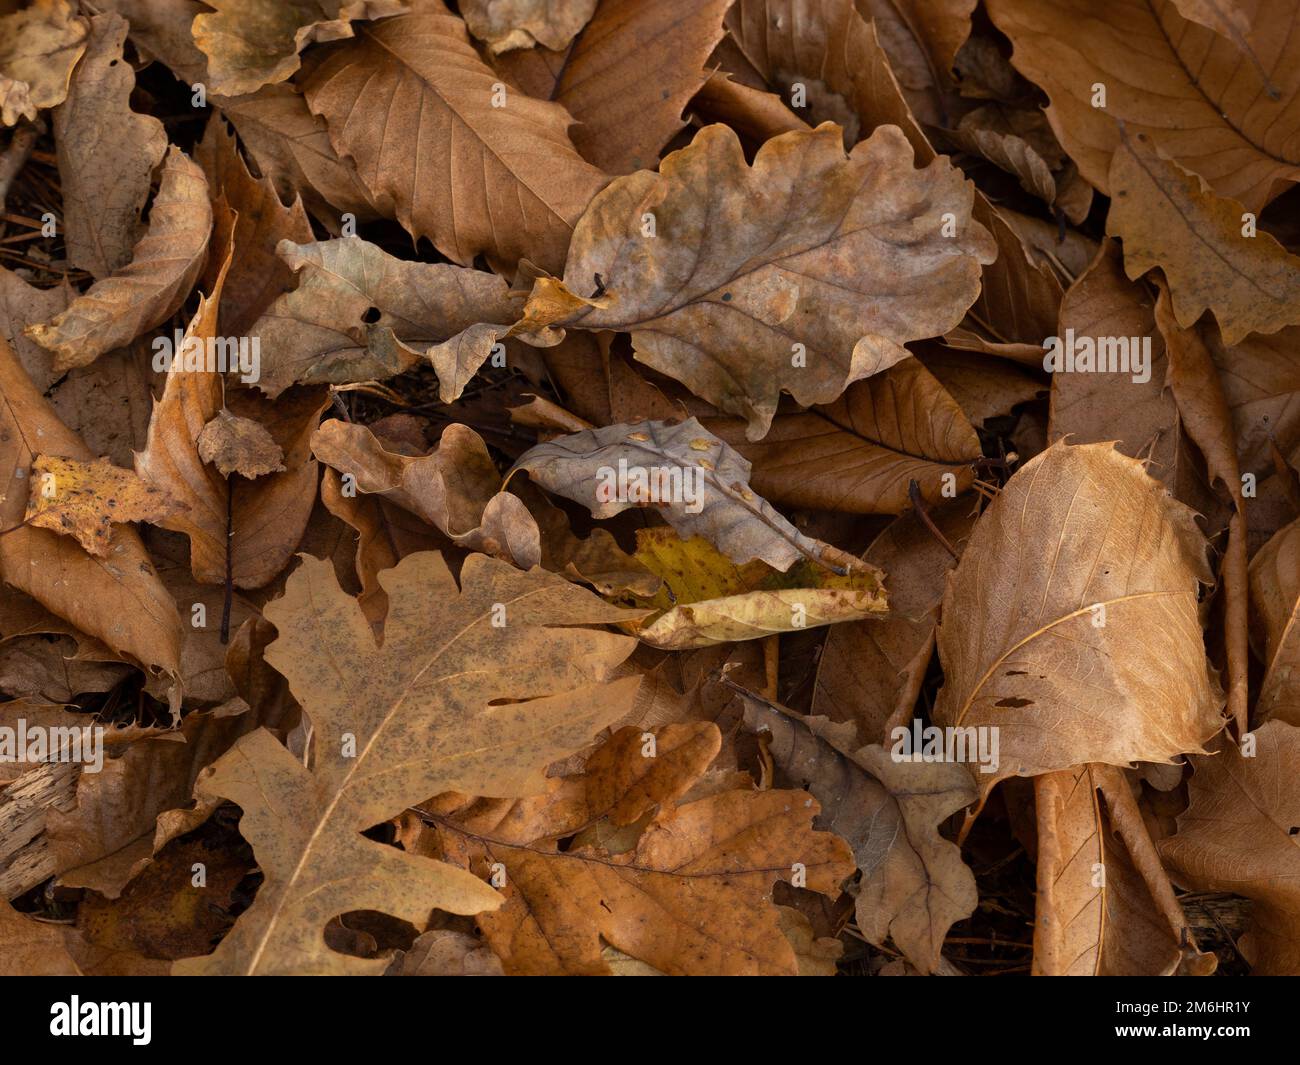 Oak Galls and Fallen Leaves Stock Photo